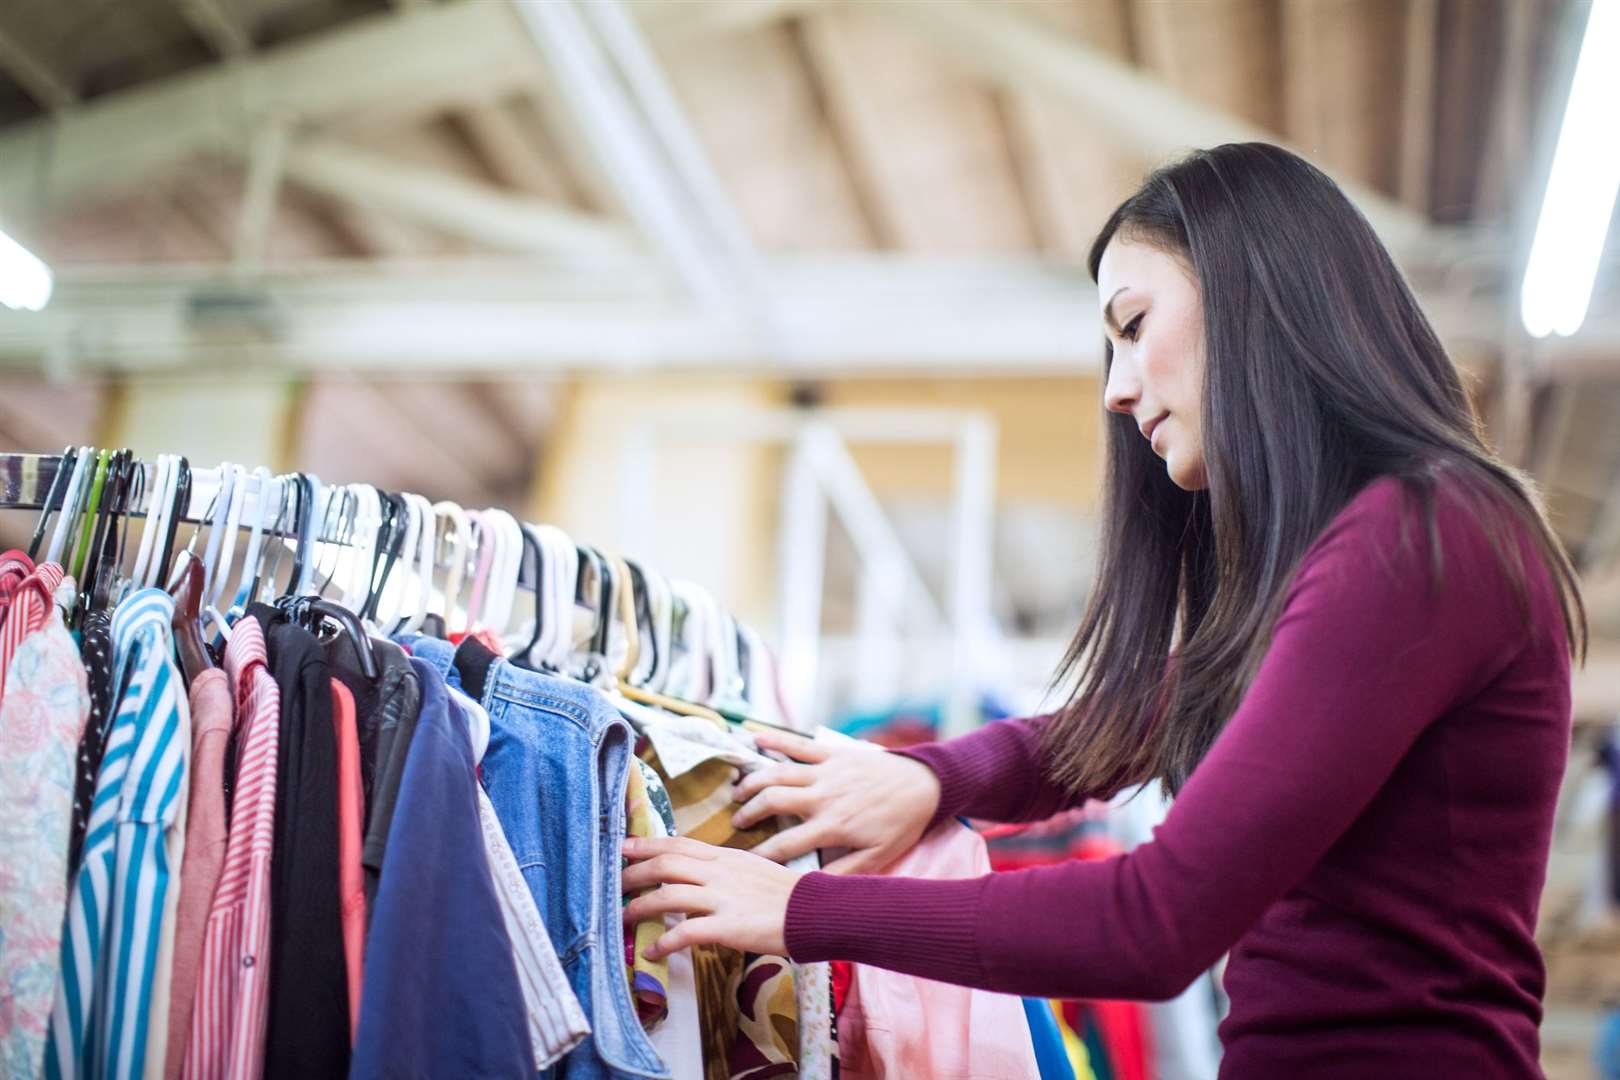 The trend for buying preloved clothes continues to rise in popularity. Image: Stock photo.